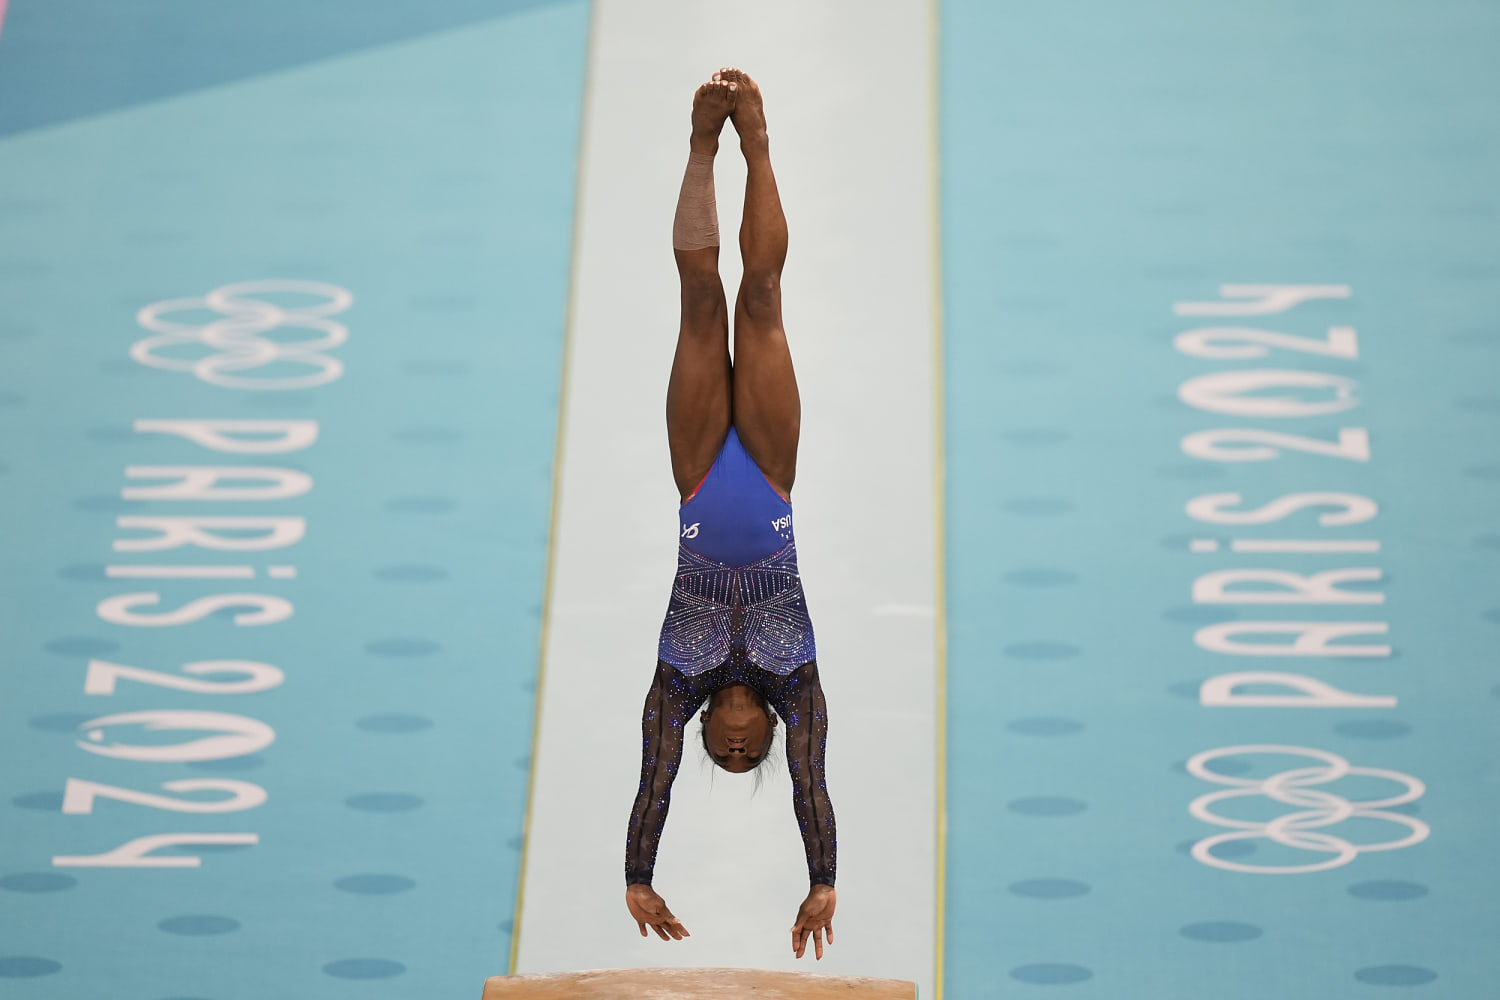 There's a simple reason Simone Biles seems so unbeatable at the Paris Olympics        